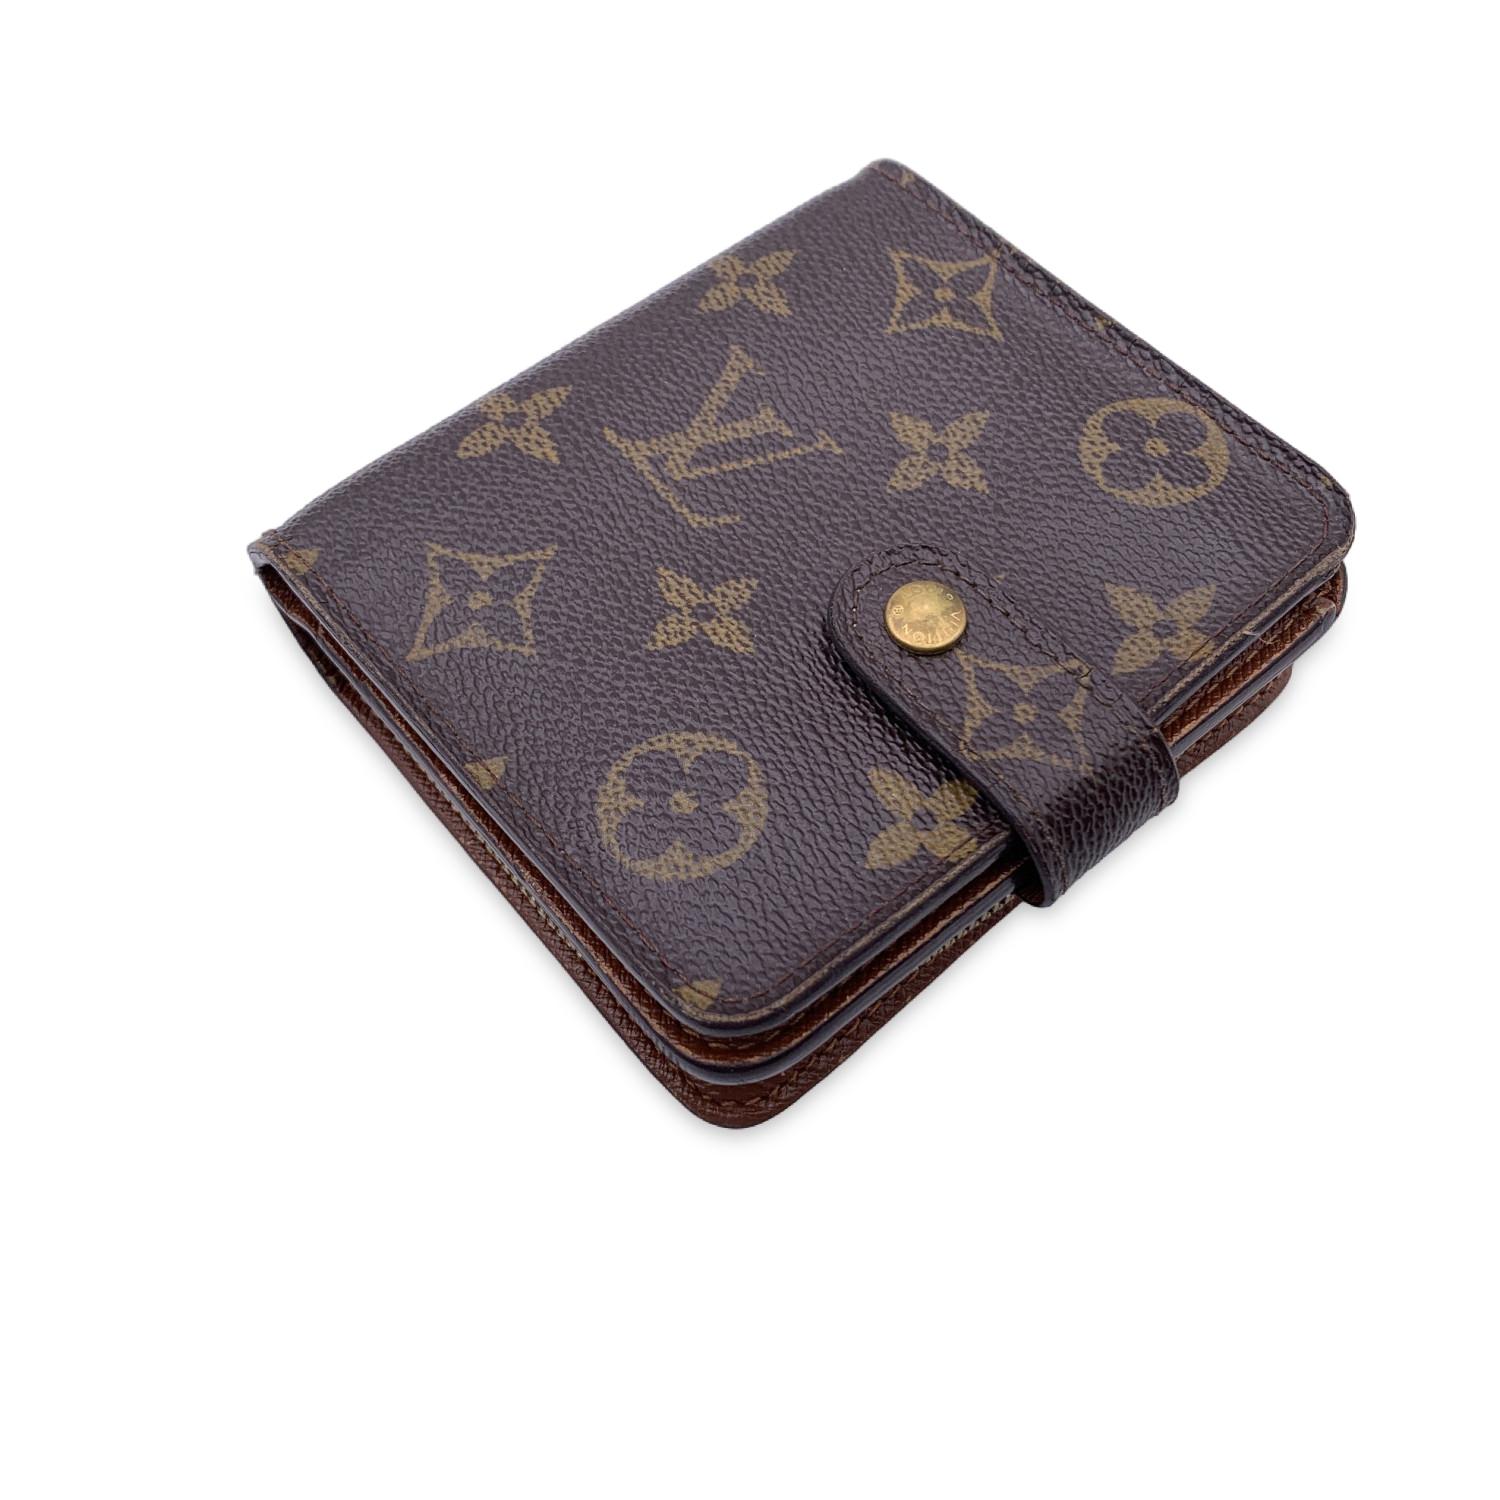 Louis Vuitton vintage square-shaped compact wallet. Snap button. Rear zip coin compartment. Crafted in brown monogram canvas with brown leather interior. 1 bill compartment, 3 credit card slots and 2 open pockets inside. 'Louis Vuitton Paris - Made